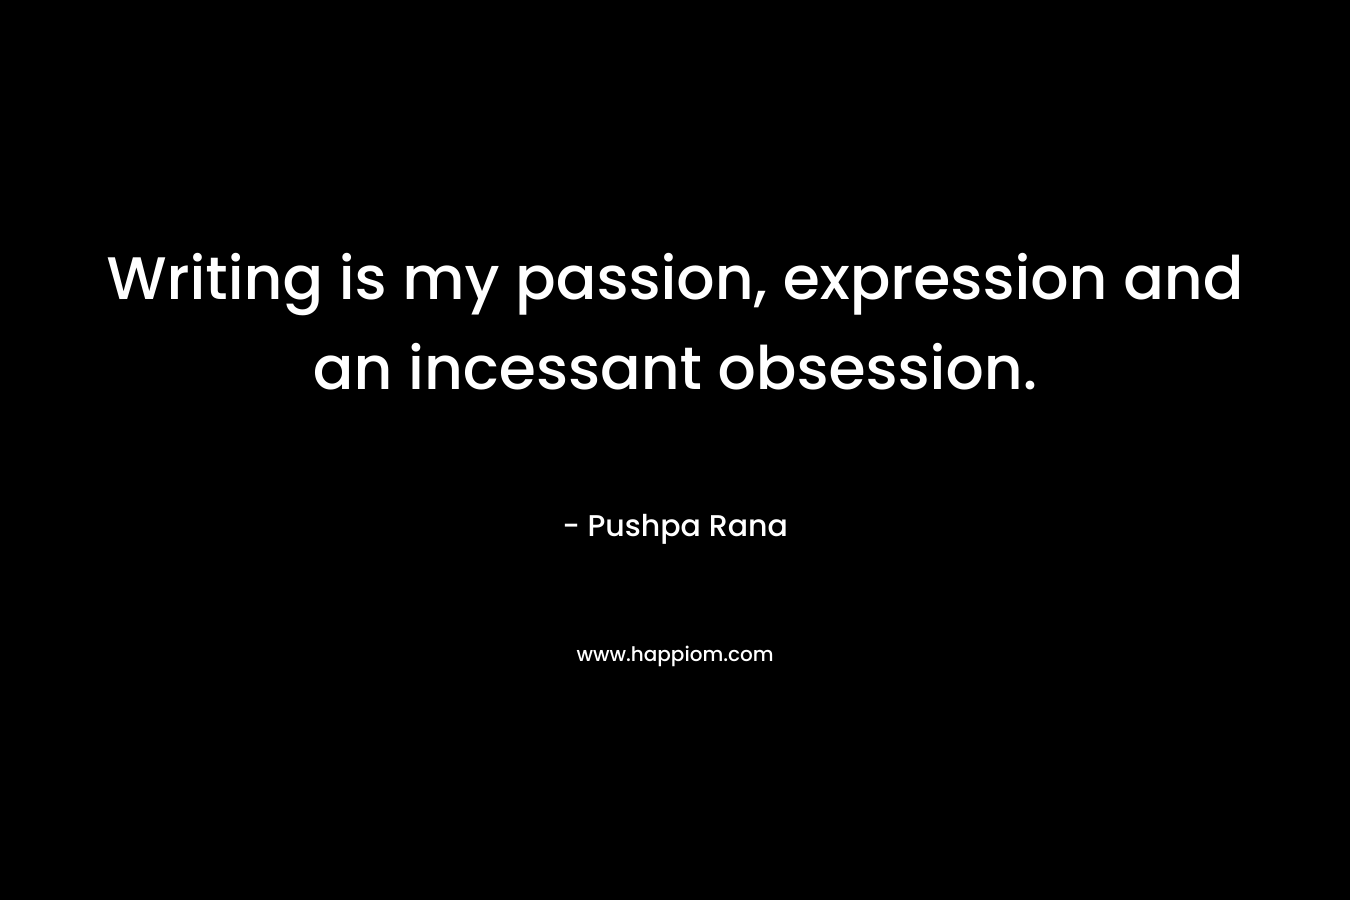 Writing is my passion, expression and an incessant obsession. – Pushpa Rana